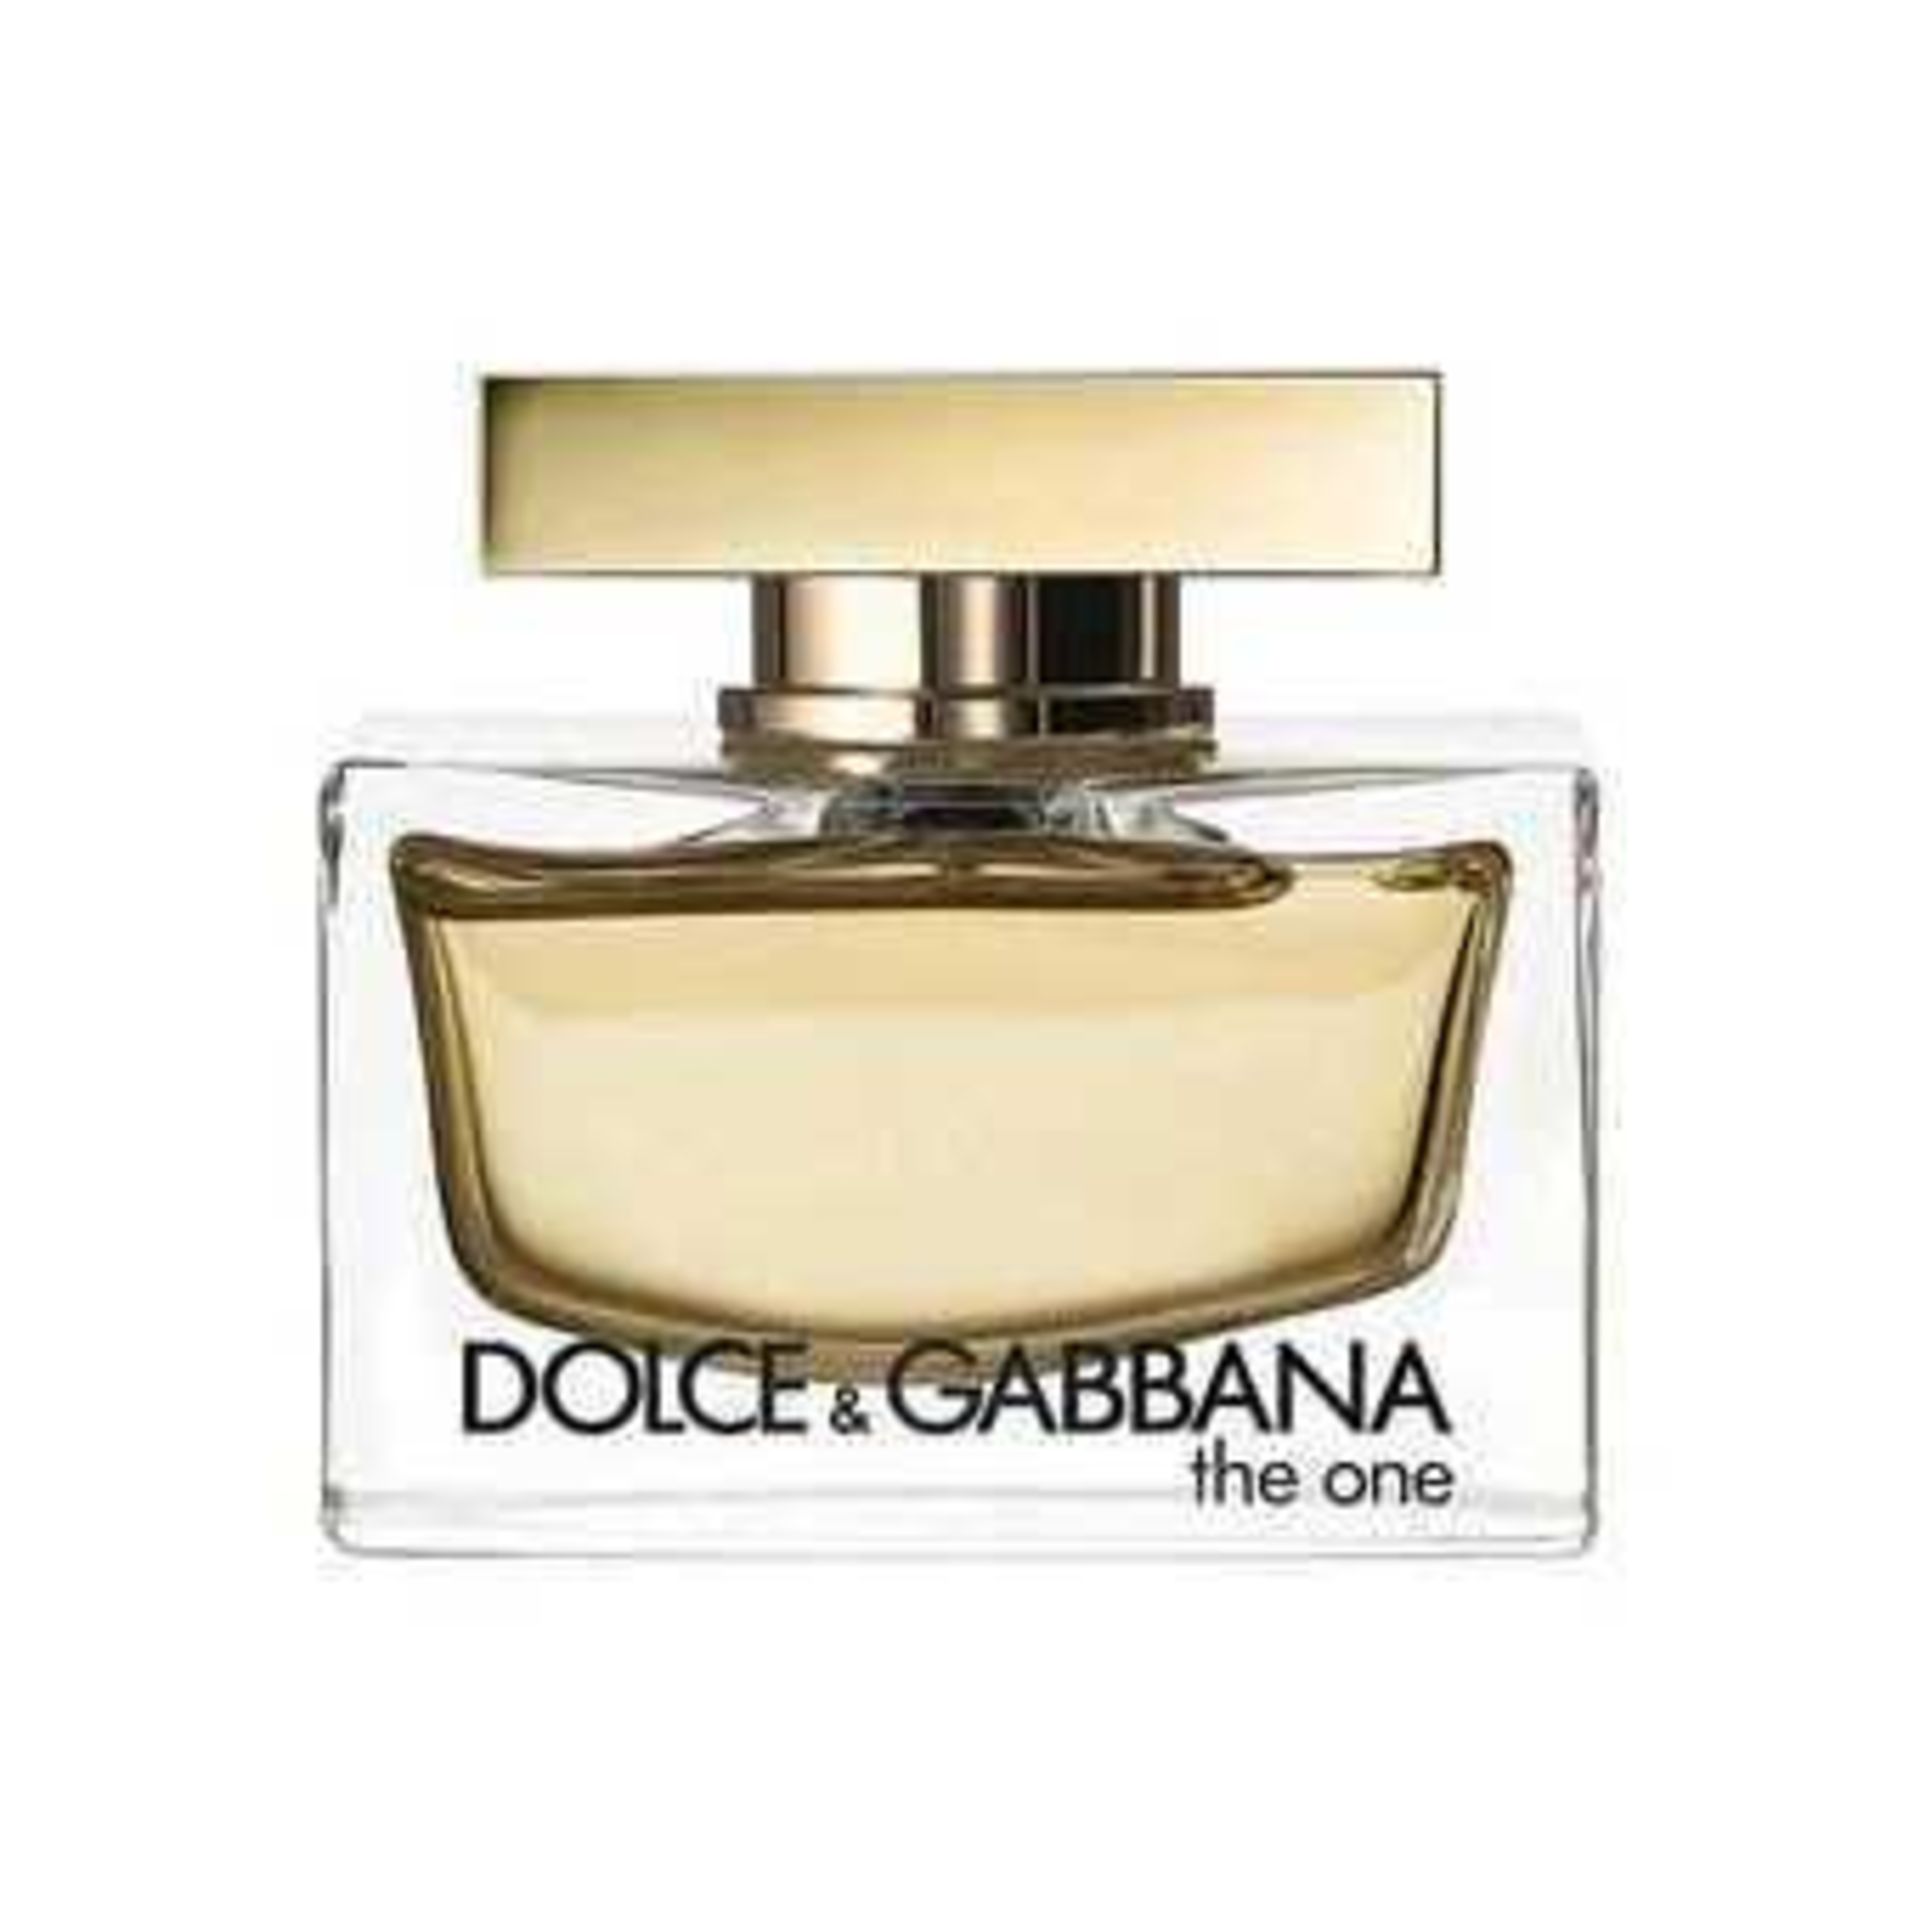 RRP £80 Unboxed Unused Ex-Display Tester Bottle Of Dolce And Gabbana The One Eau De Parfum Spray 75M